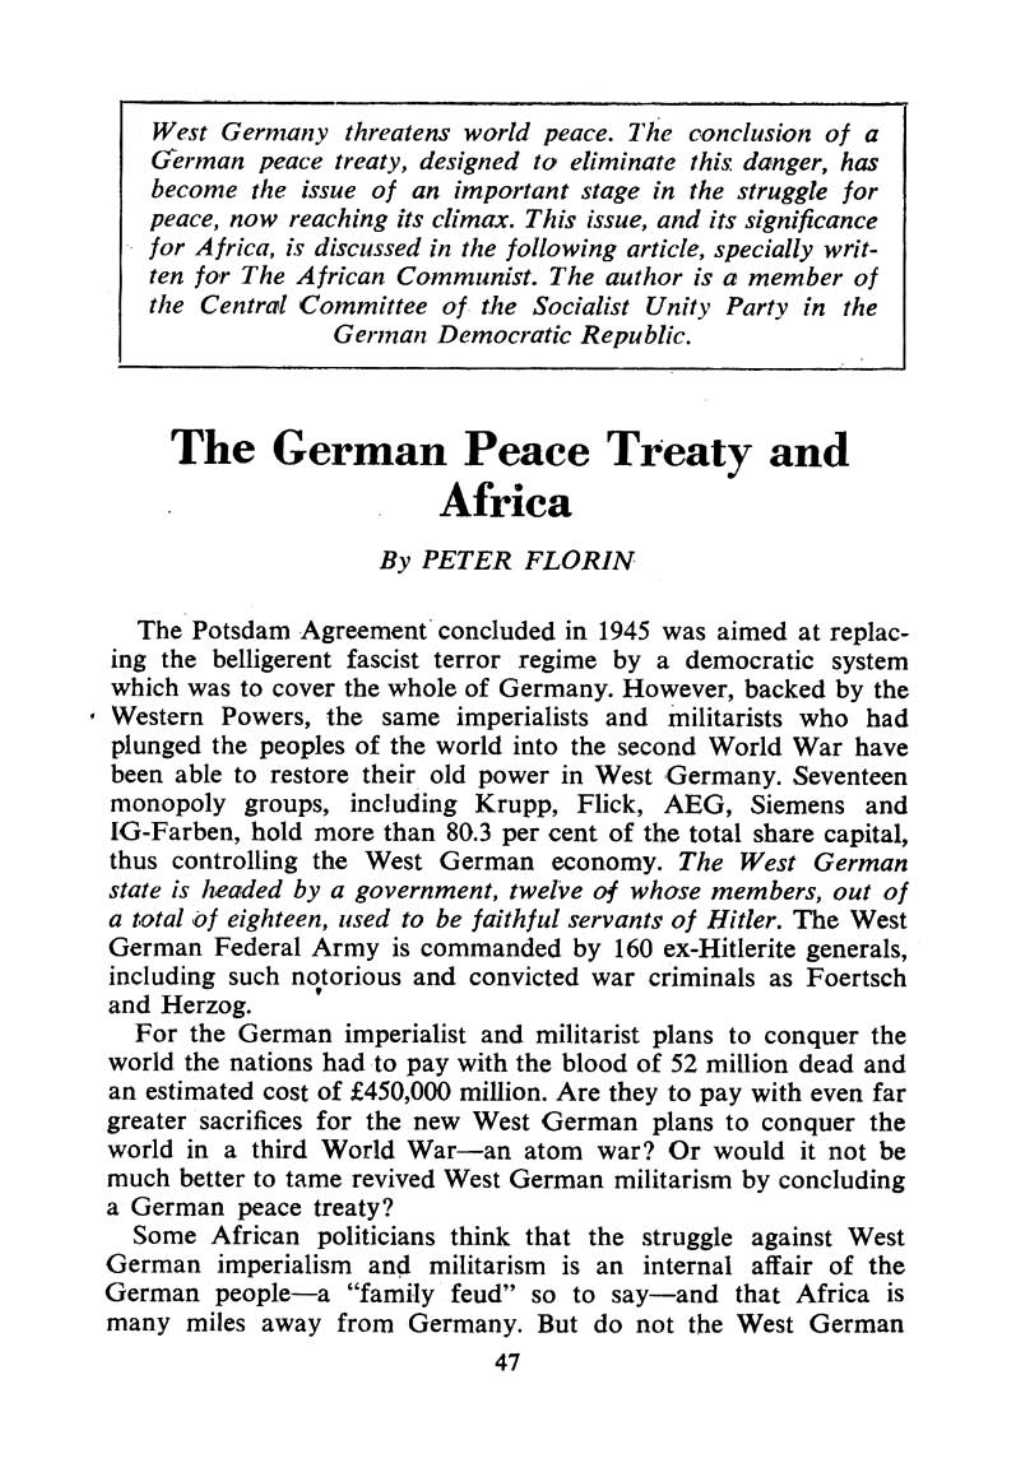 The German Peace Treaty and Africa by PETER FLORIN